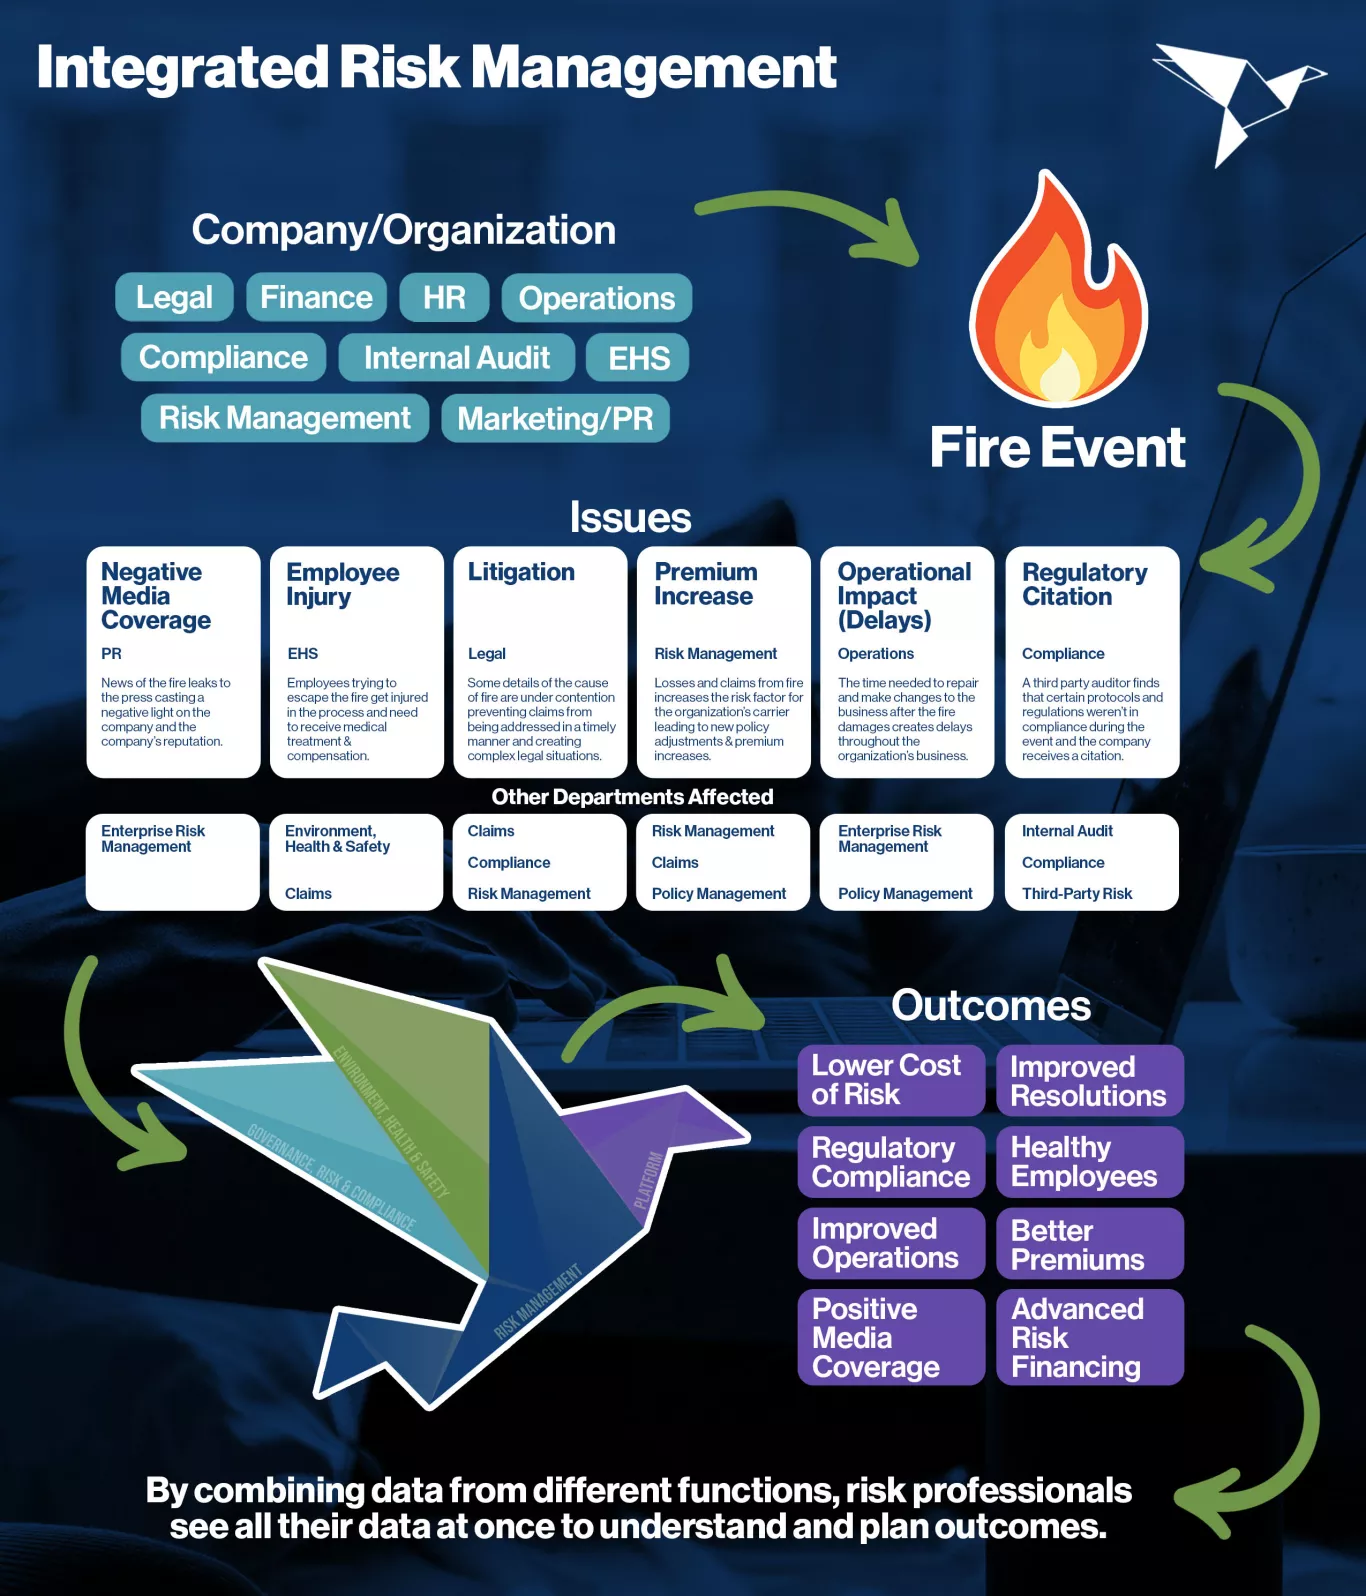 Integrated Risk Management (IRM) – org departments, issues, and outcomes associated with a fire event